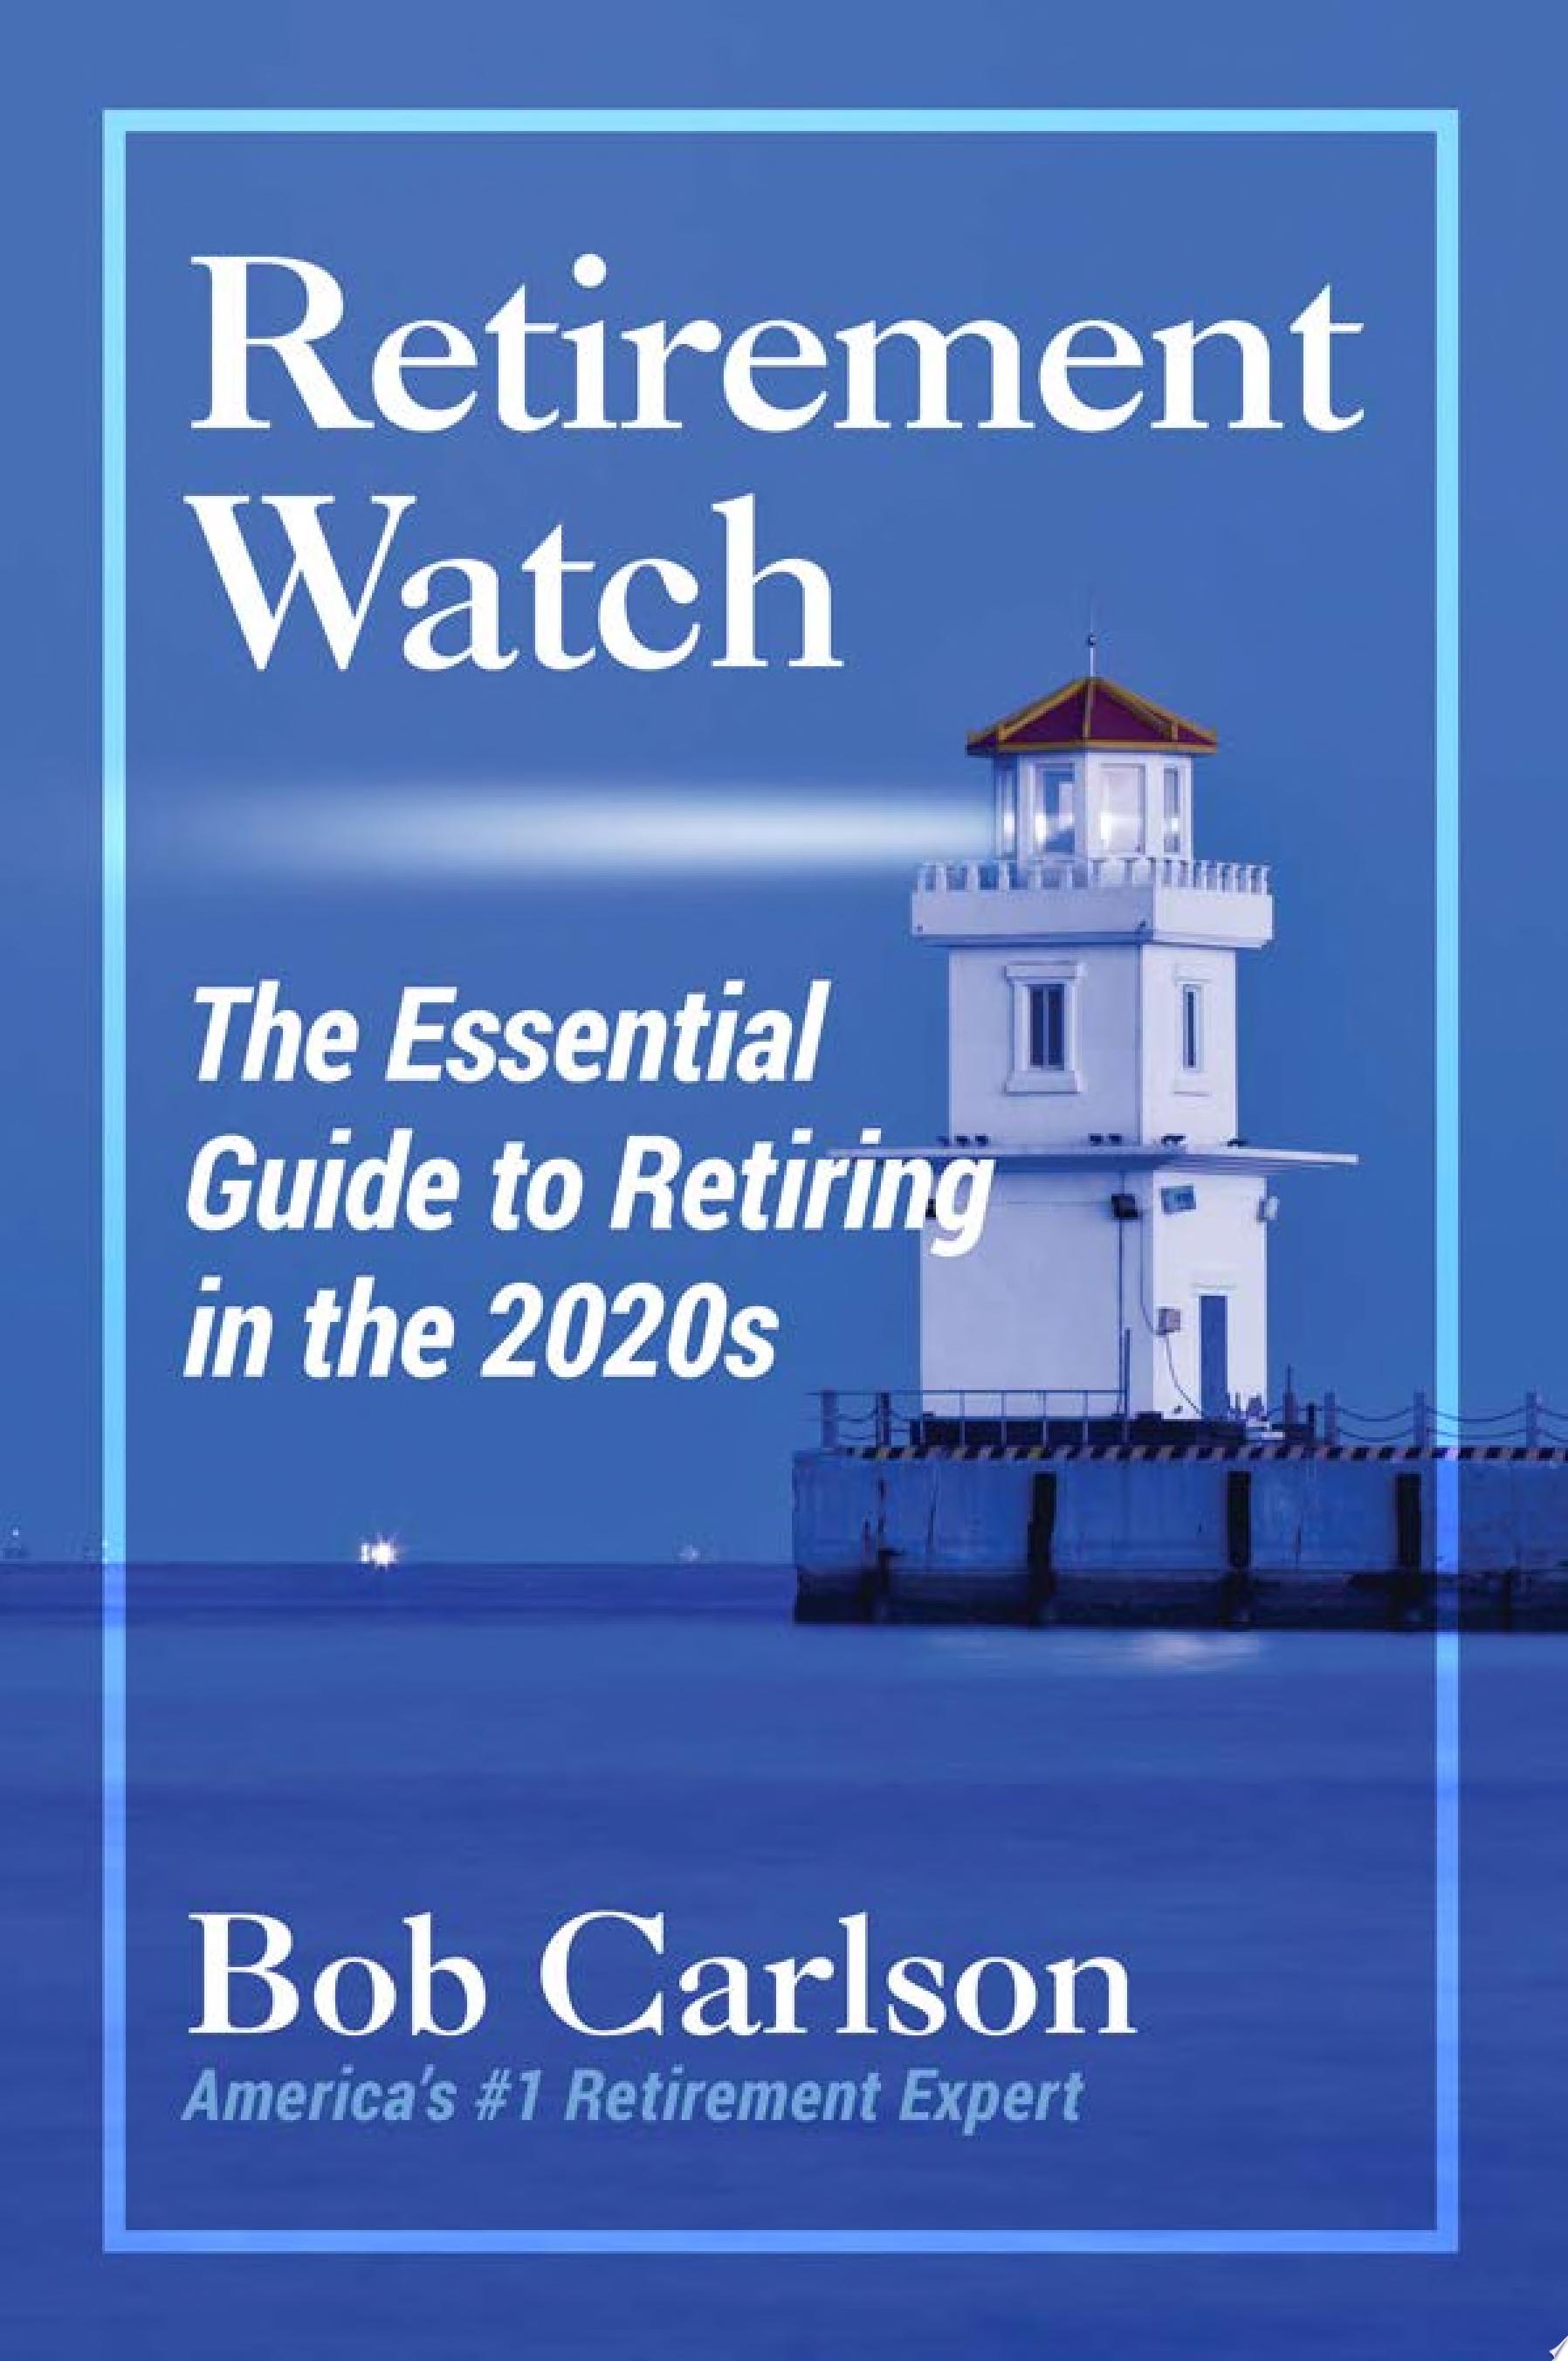 Image for "Retirement Watch"